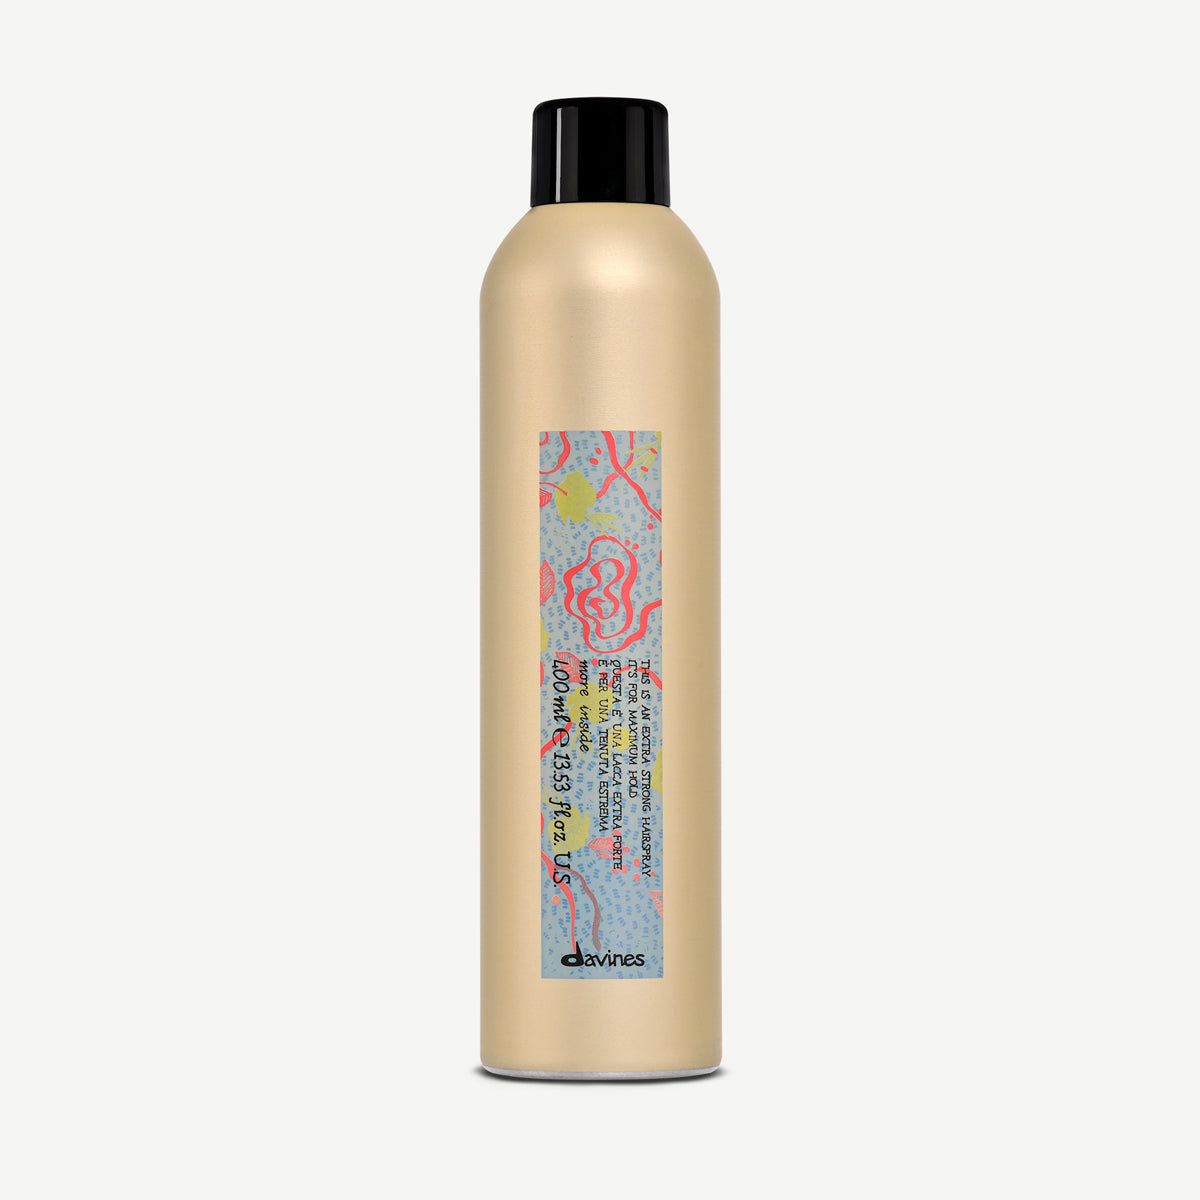 This Is An Extra Strong Hairspray 1  Davines
